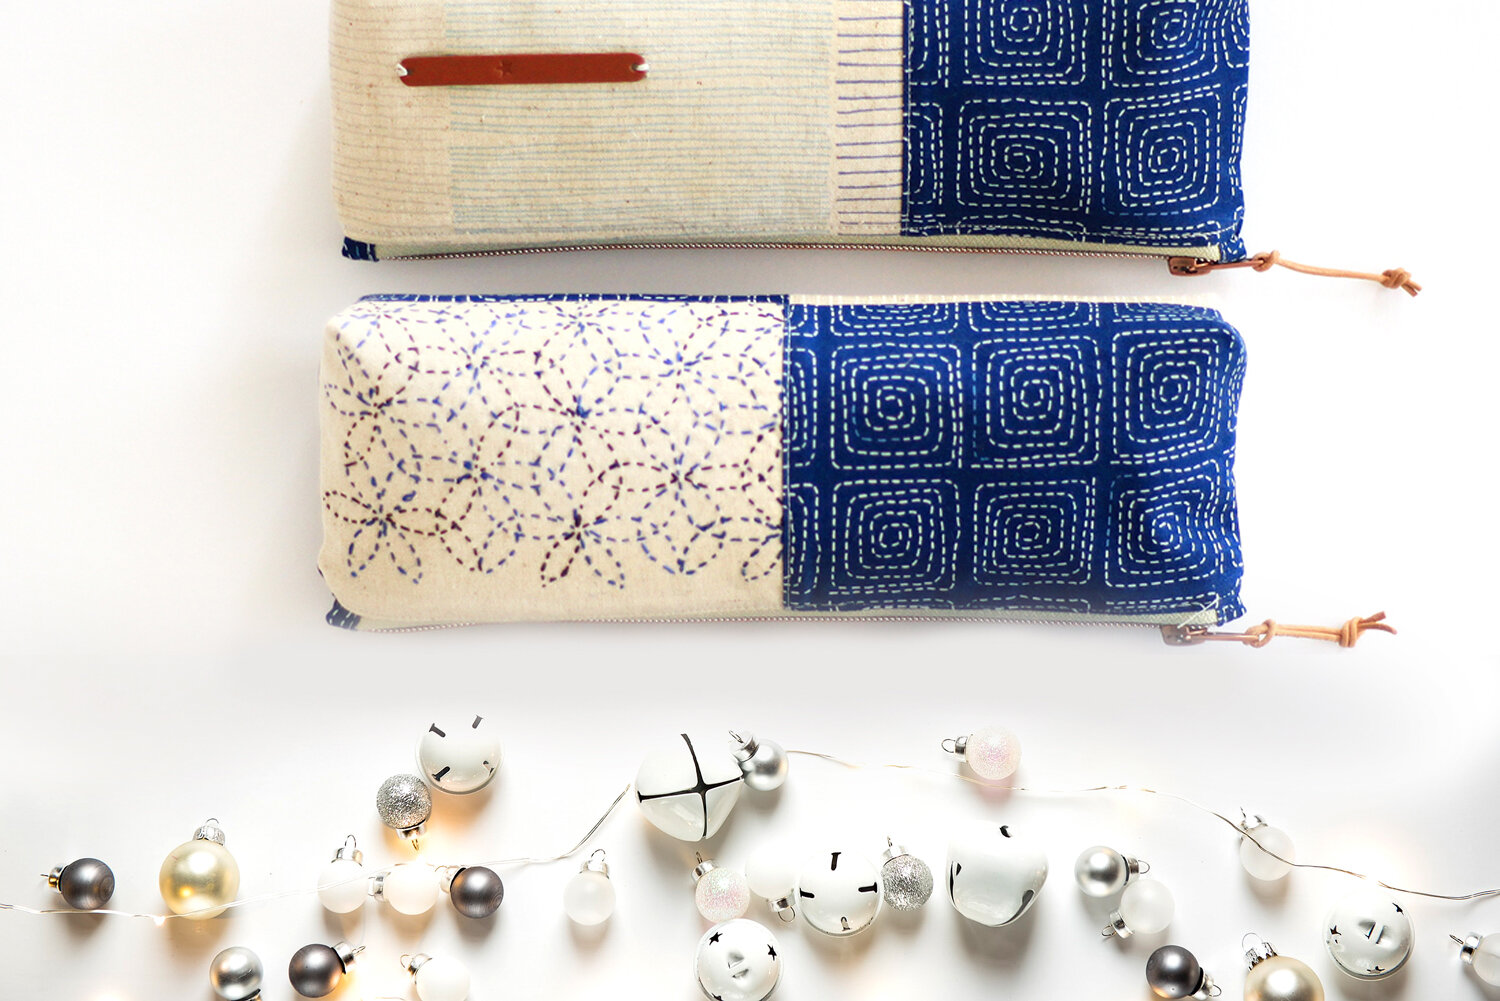 Canvas Pencil Pouch in Breeze – Free Pattern from Noodlehead